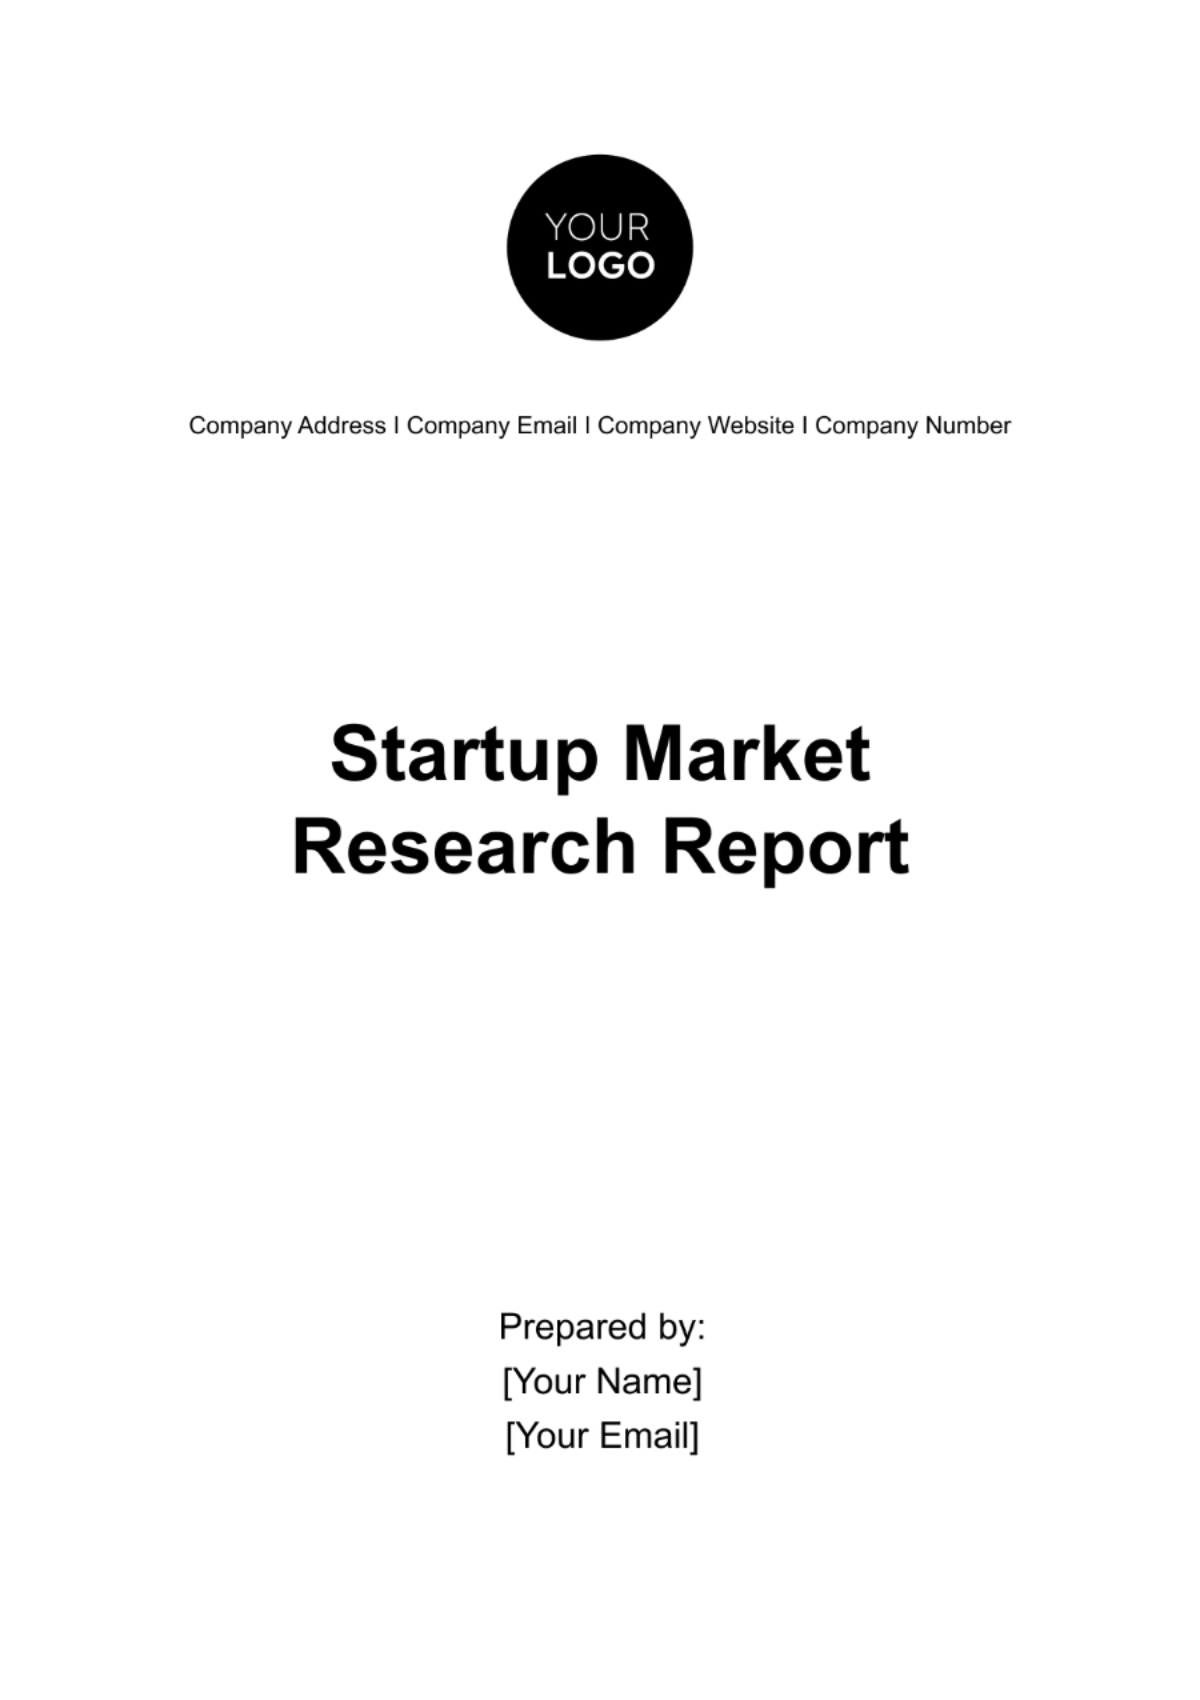 Startup Market Research Report Template